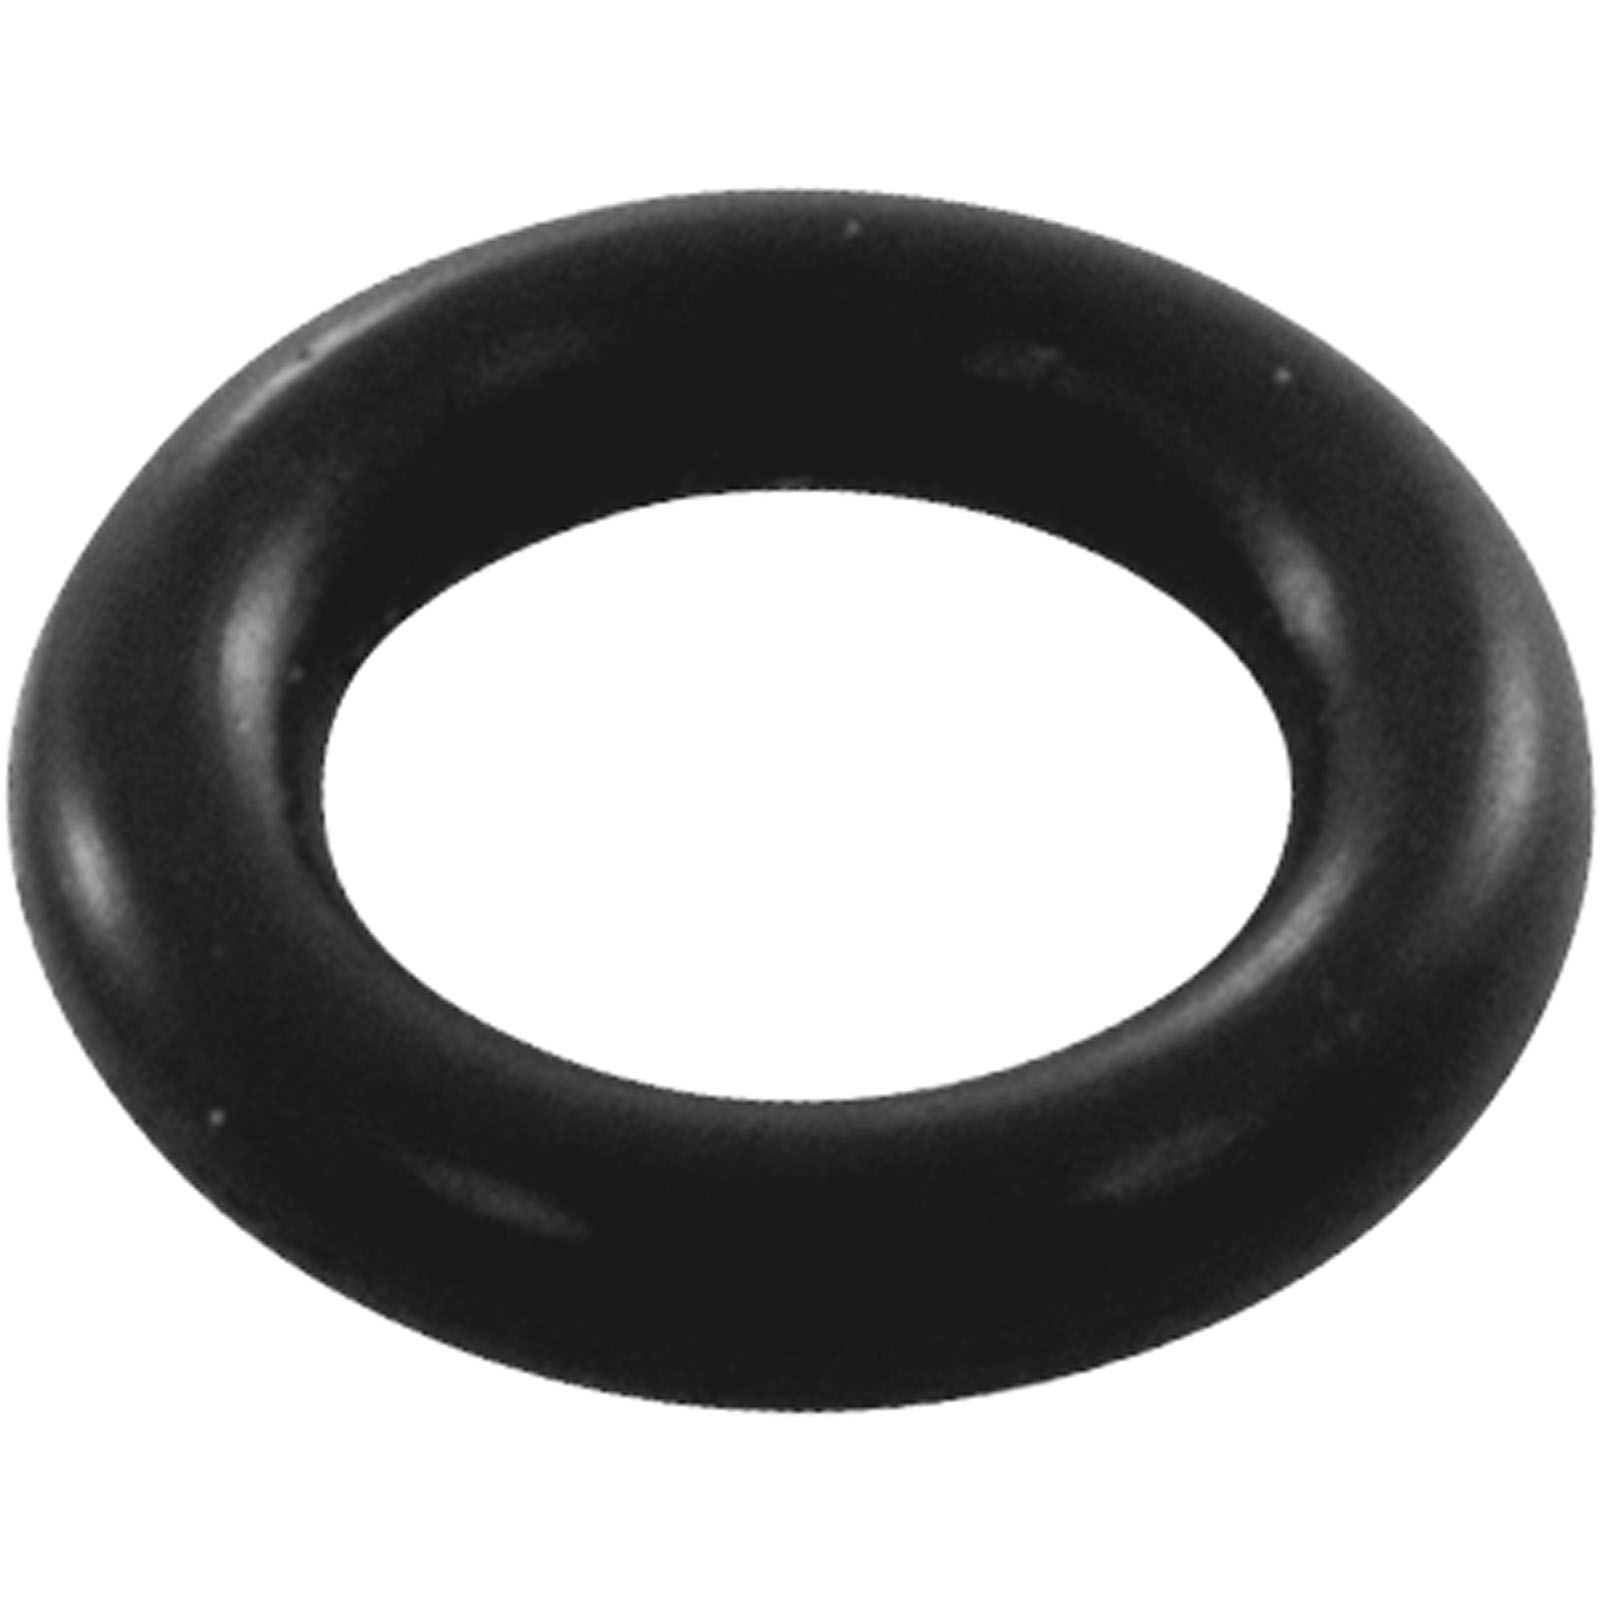 Picture of RMG-01-009 O-Ring Buna-N 3/16" ID 1/16" Cross SectionSensorGeneric